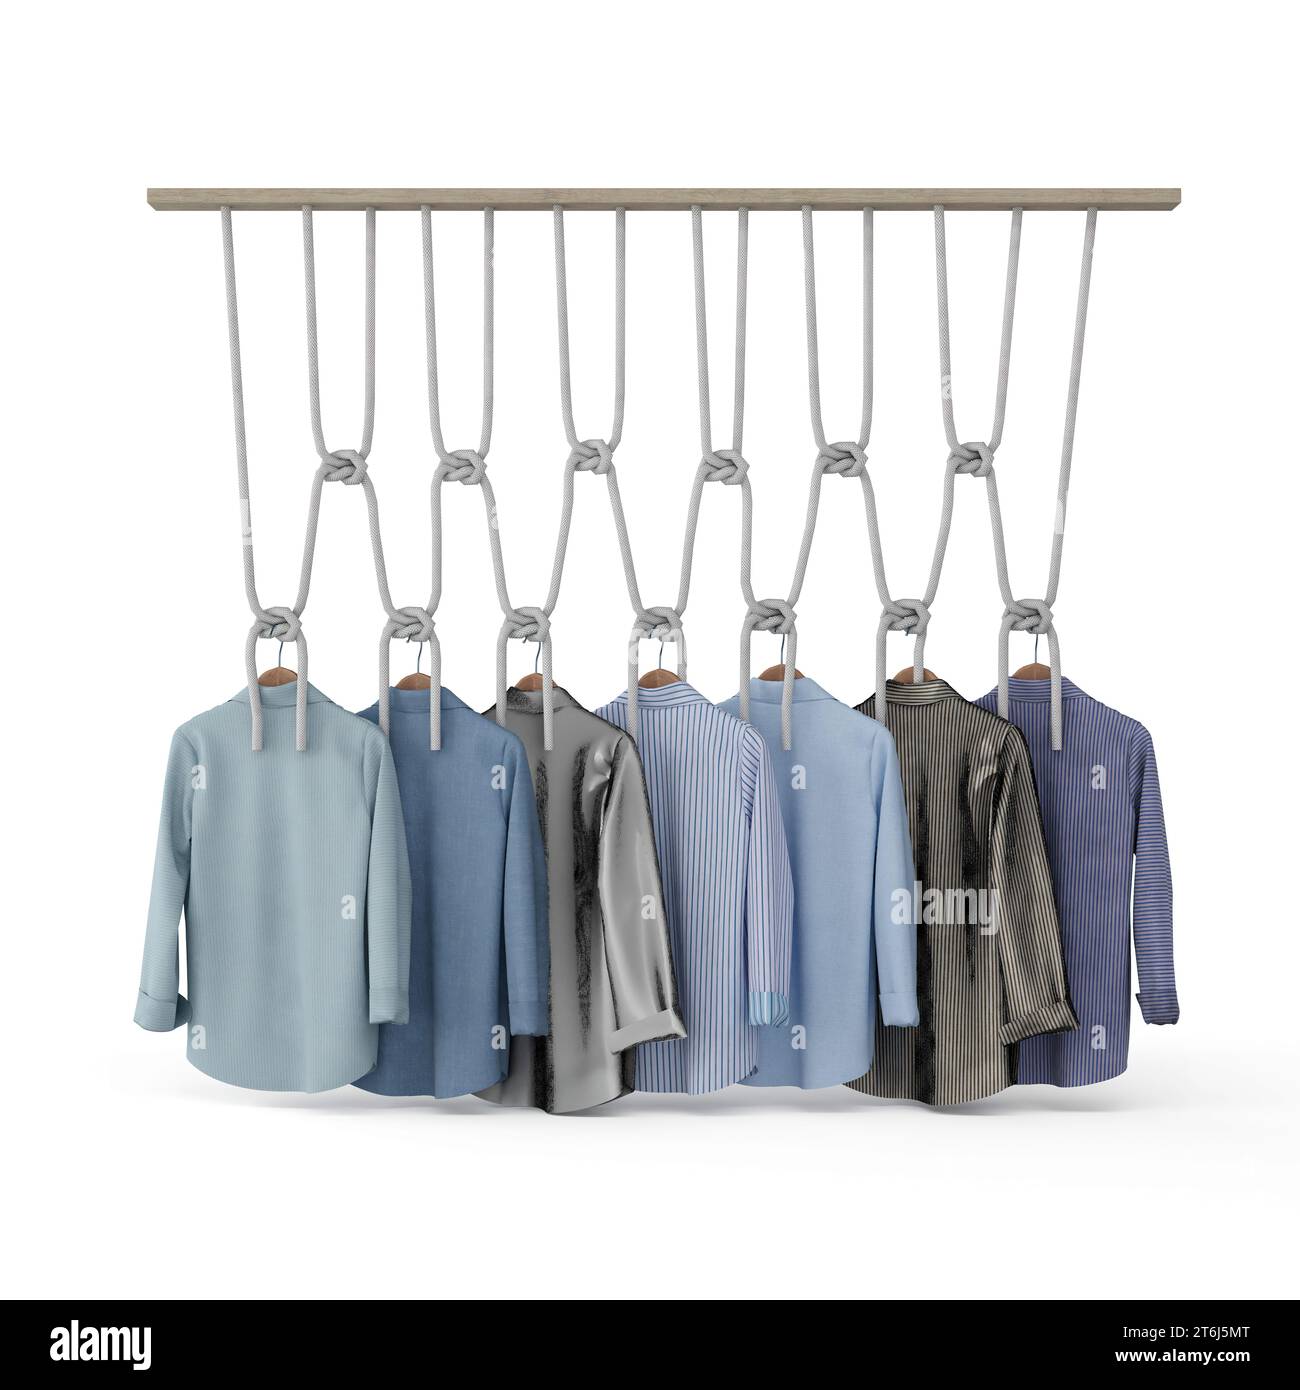 A series of men's shirts in colors of blue, grey and white are arranged in a line on a clothes rack Stock Photo